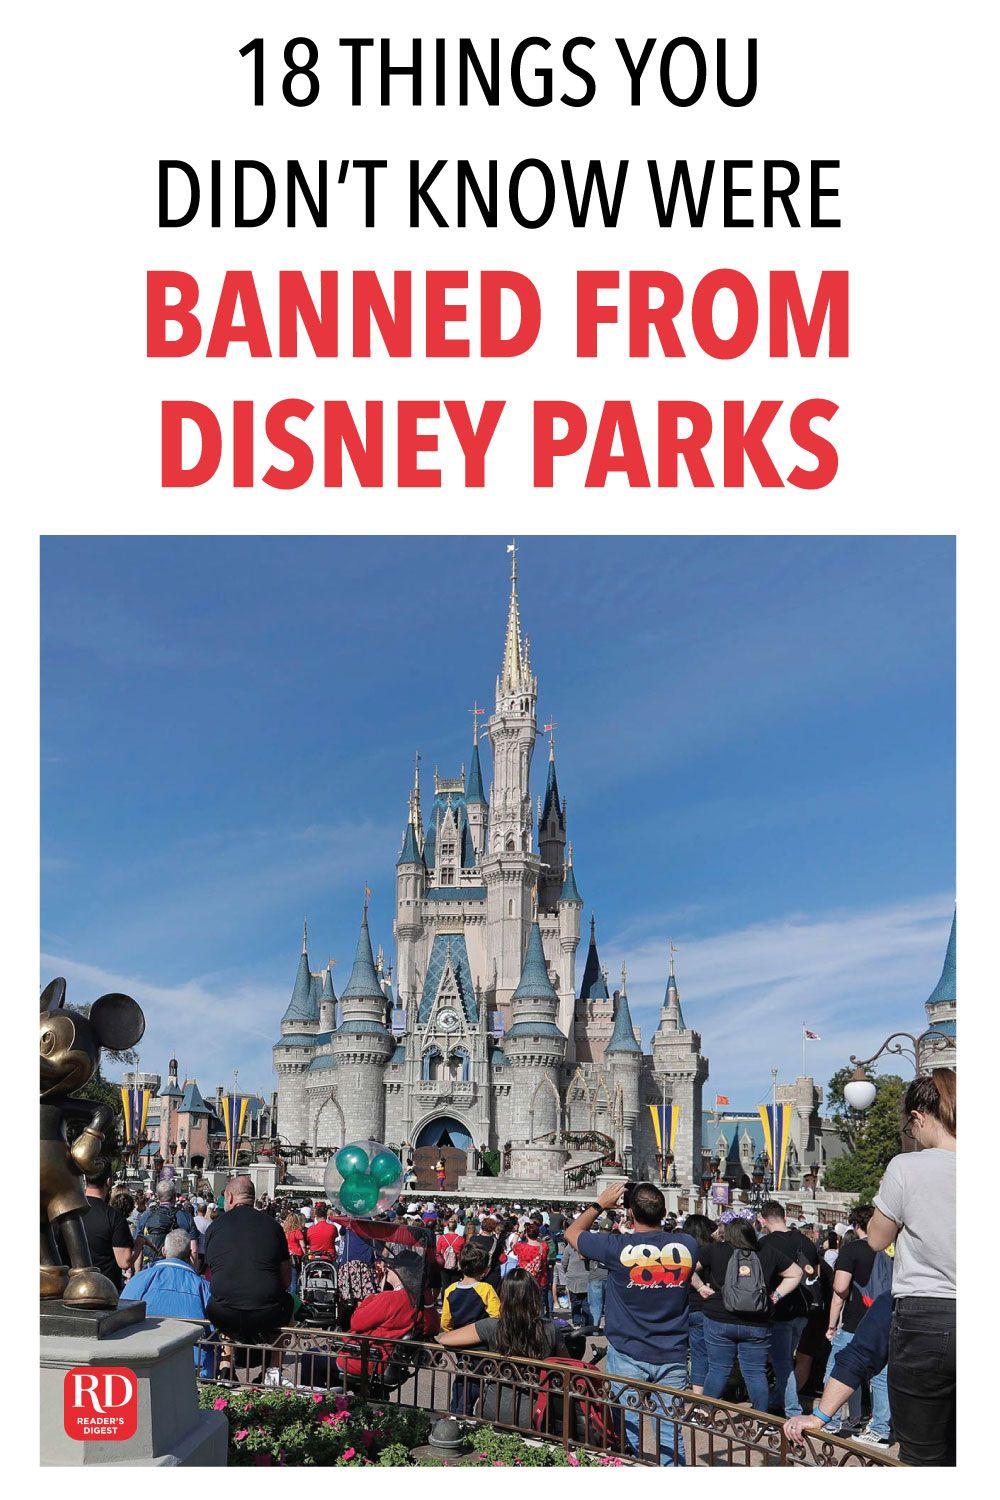 20 Things You Didn’t Know Were Banned from Disney Parks